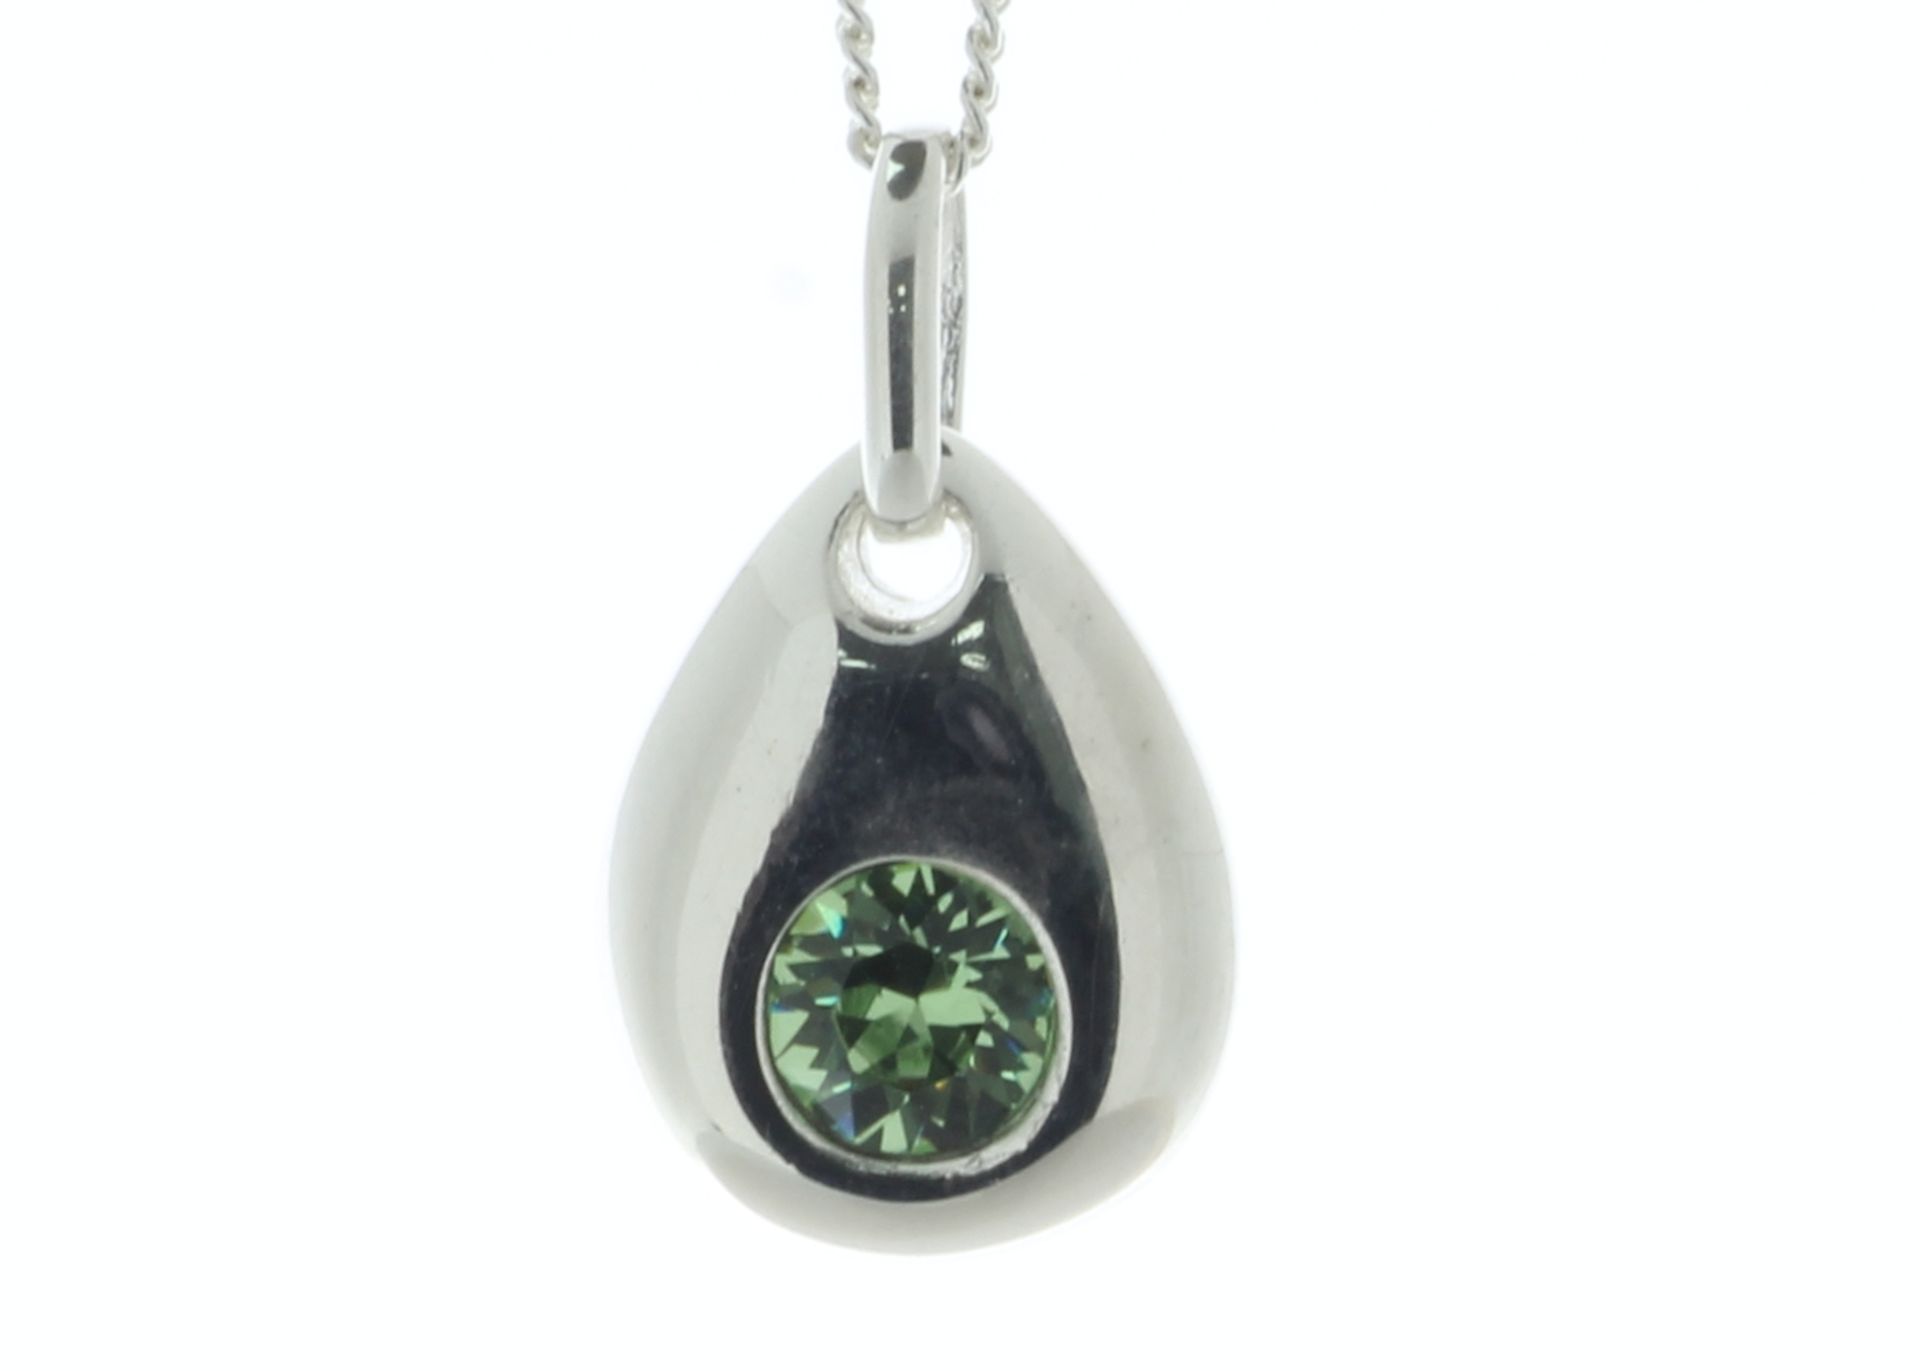 Sterling Silver Pendant August Birthstone 4mm Period Crystal - Valued By AGI £482.00 - A 4mm Peridot